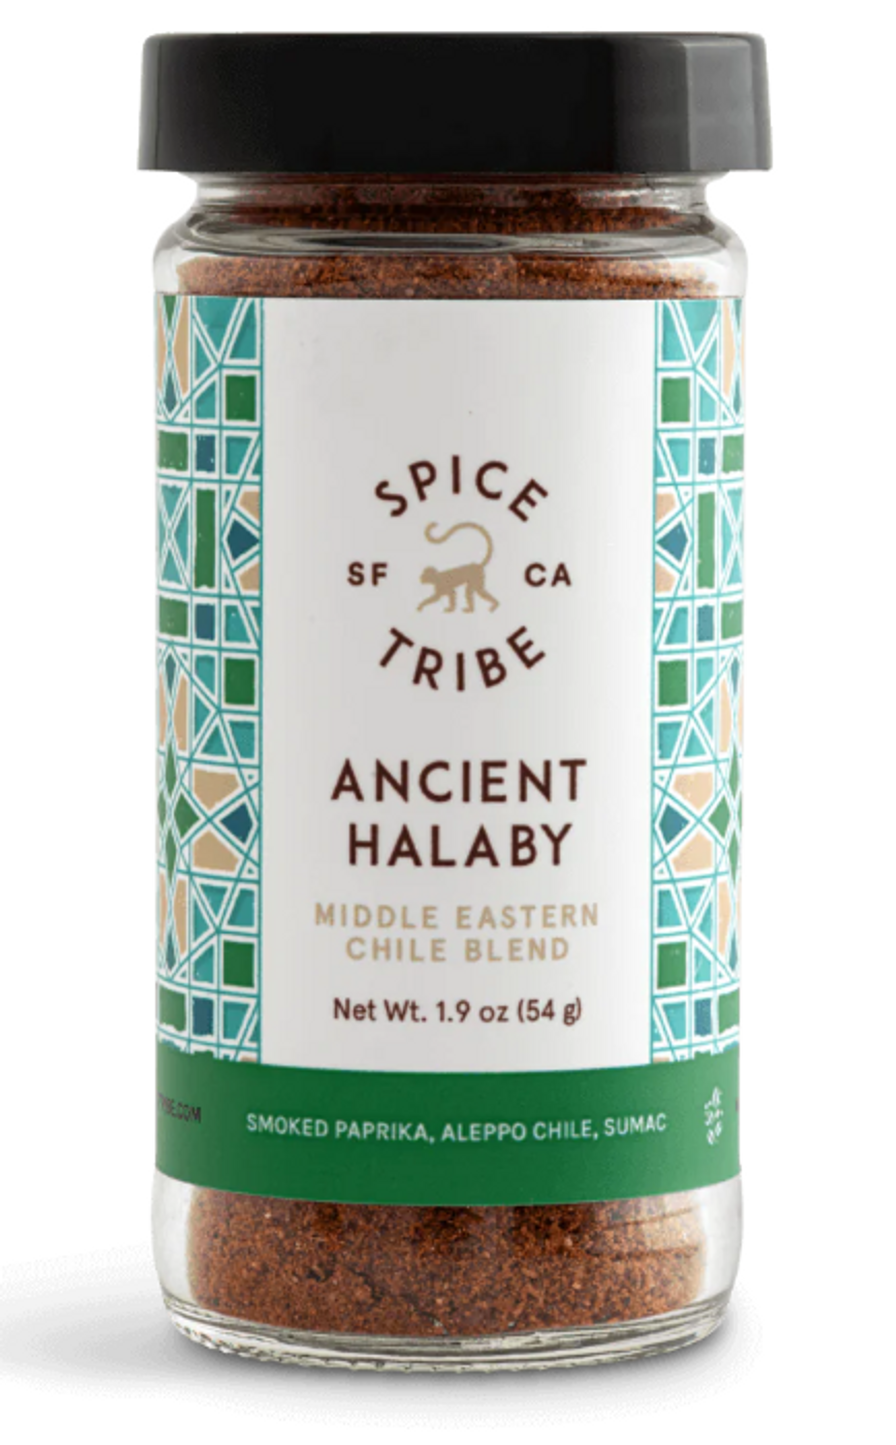 Ancient Halaby Middle Eastern Chile Blend